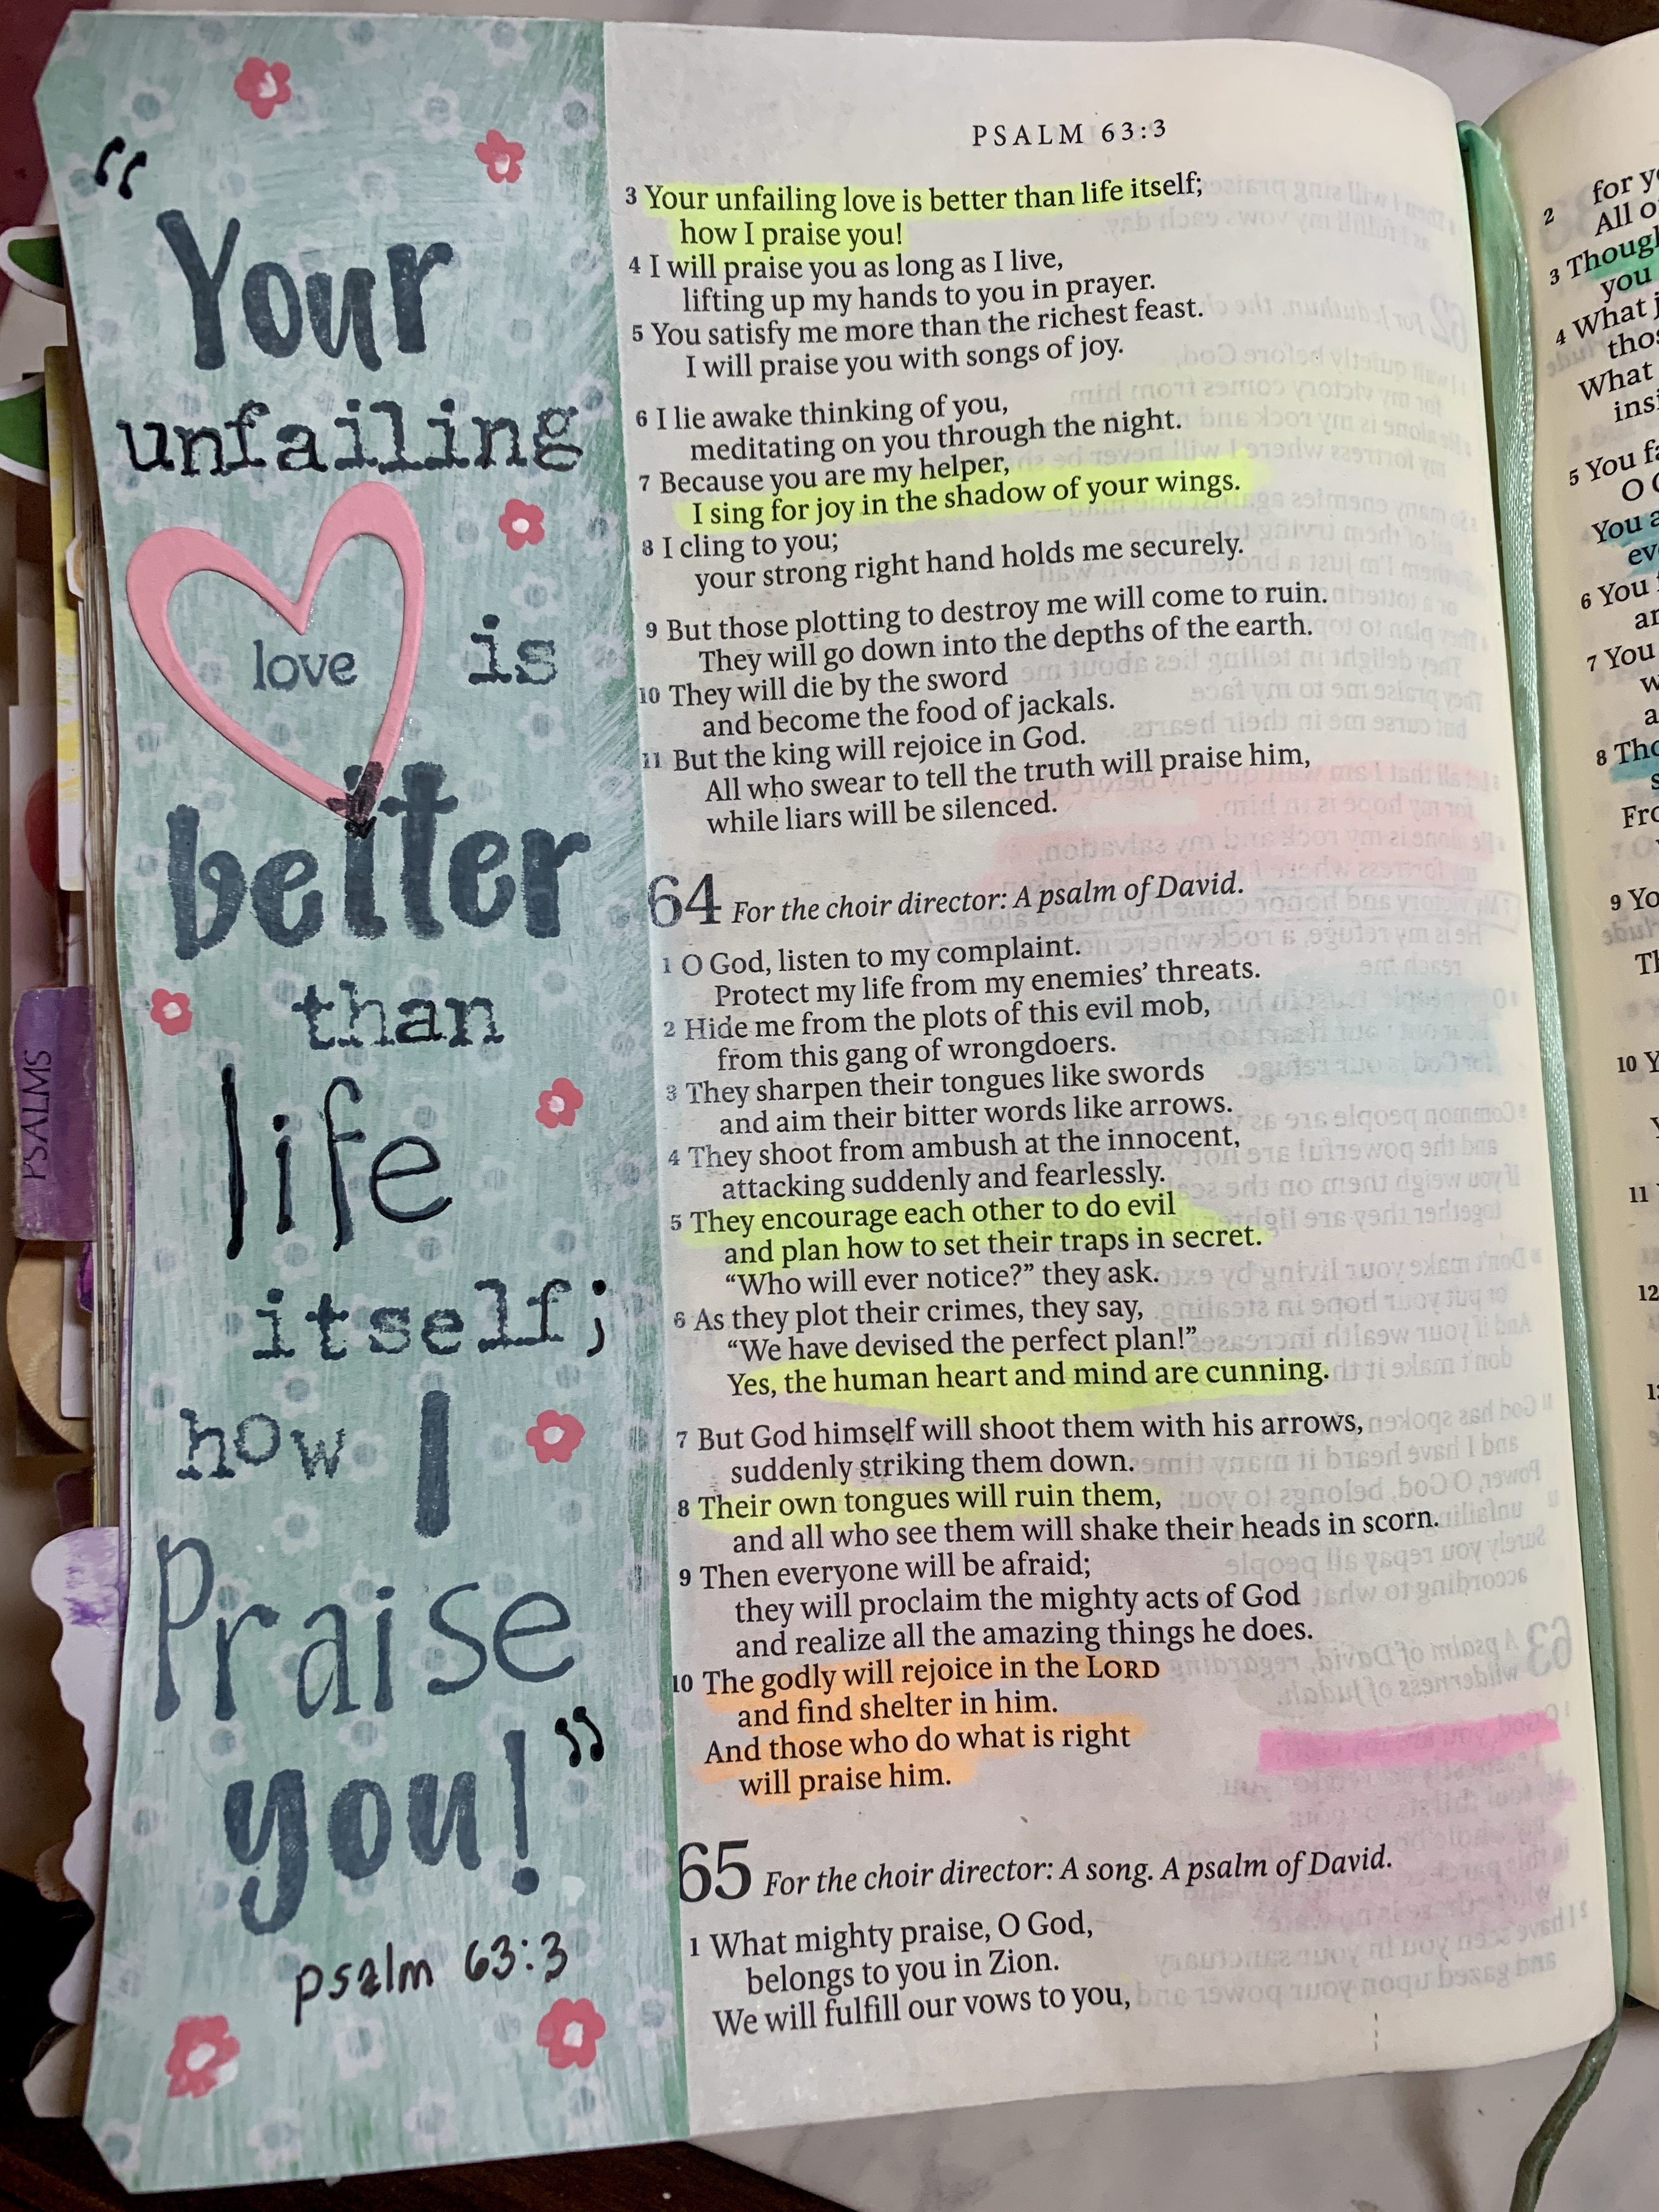 Amy's Creative Pursuits: Creative Bible Journaling - April Pages